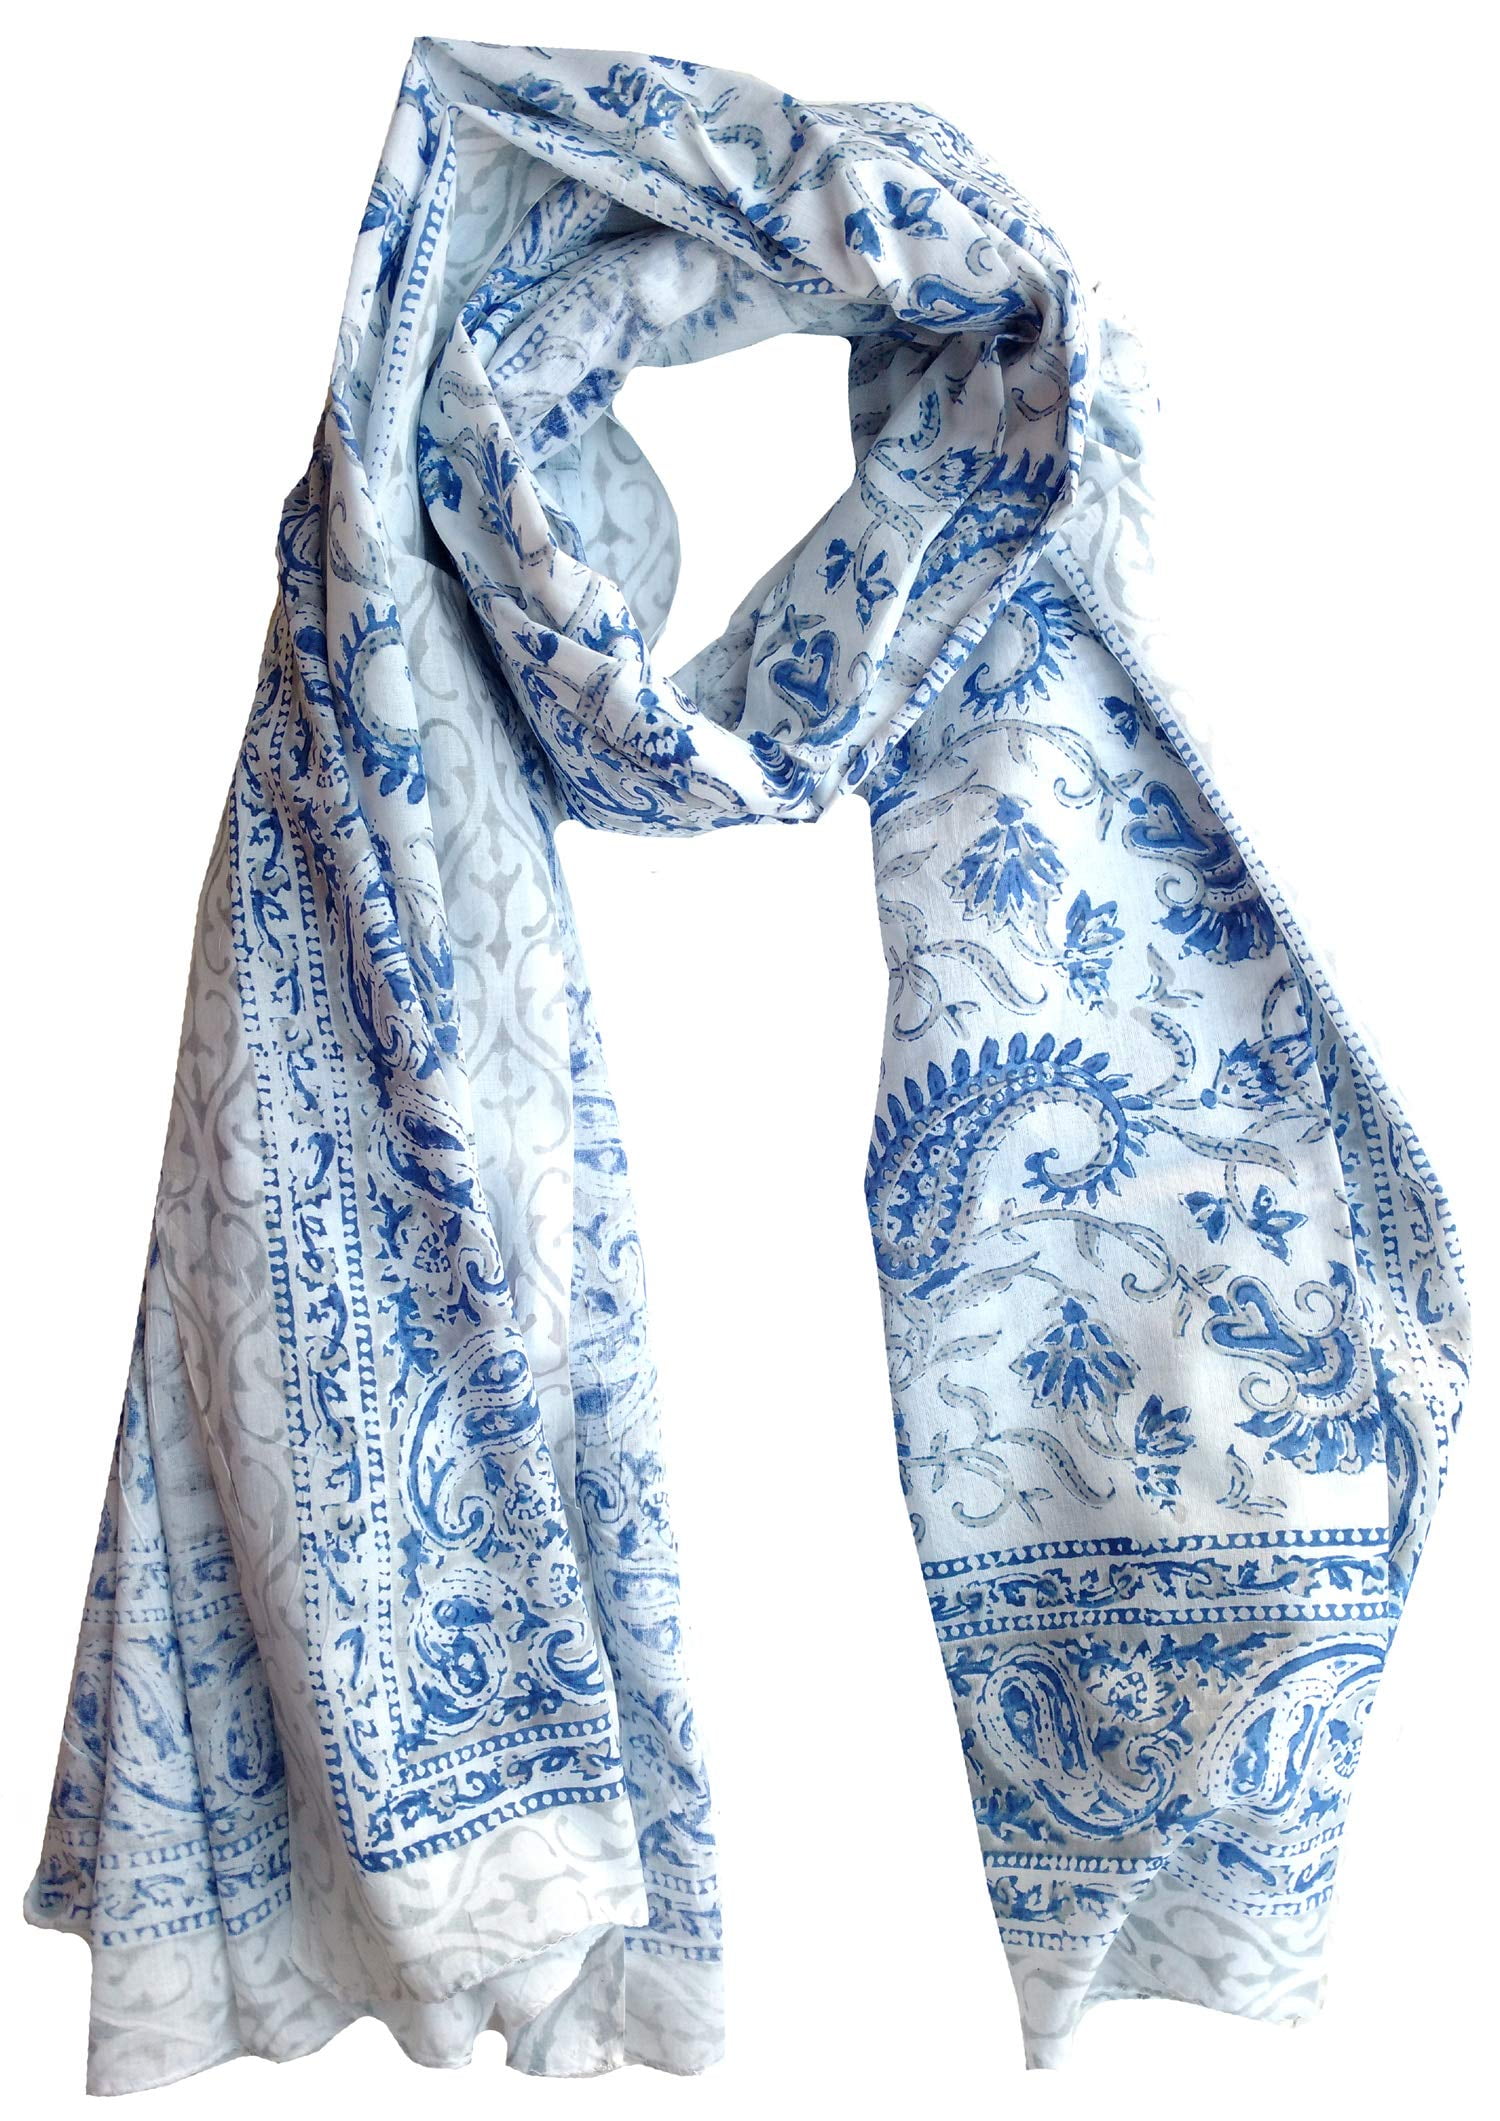 Rastogi Handcrafts 100% cotton Hand block rajasthani print scarves for women 73x44 inch size scarfs use as also sarong